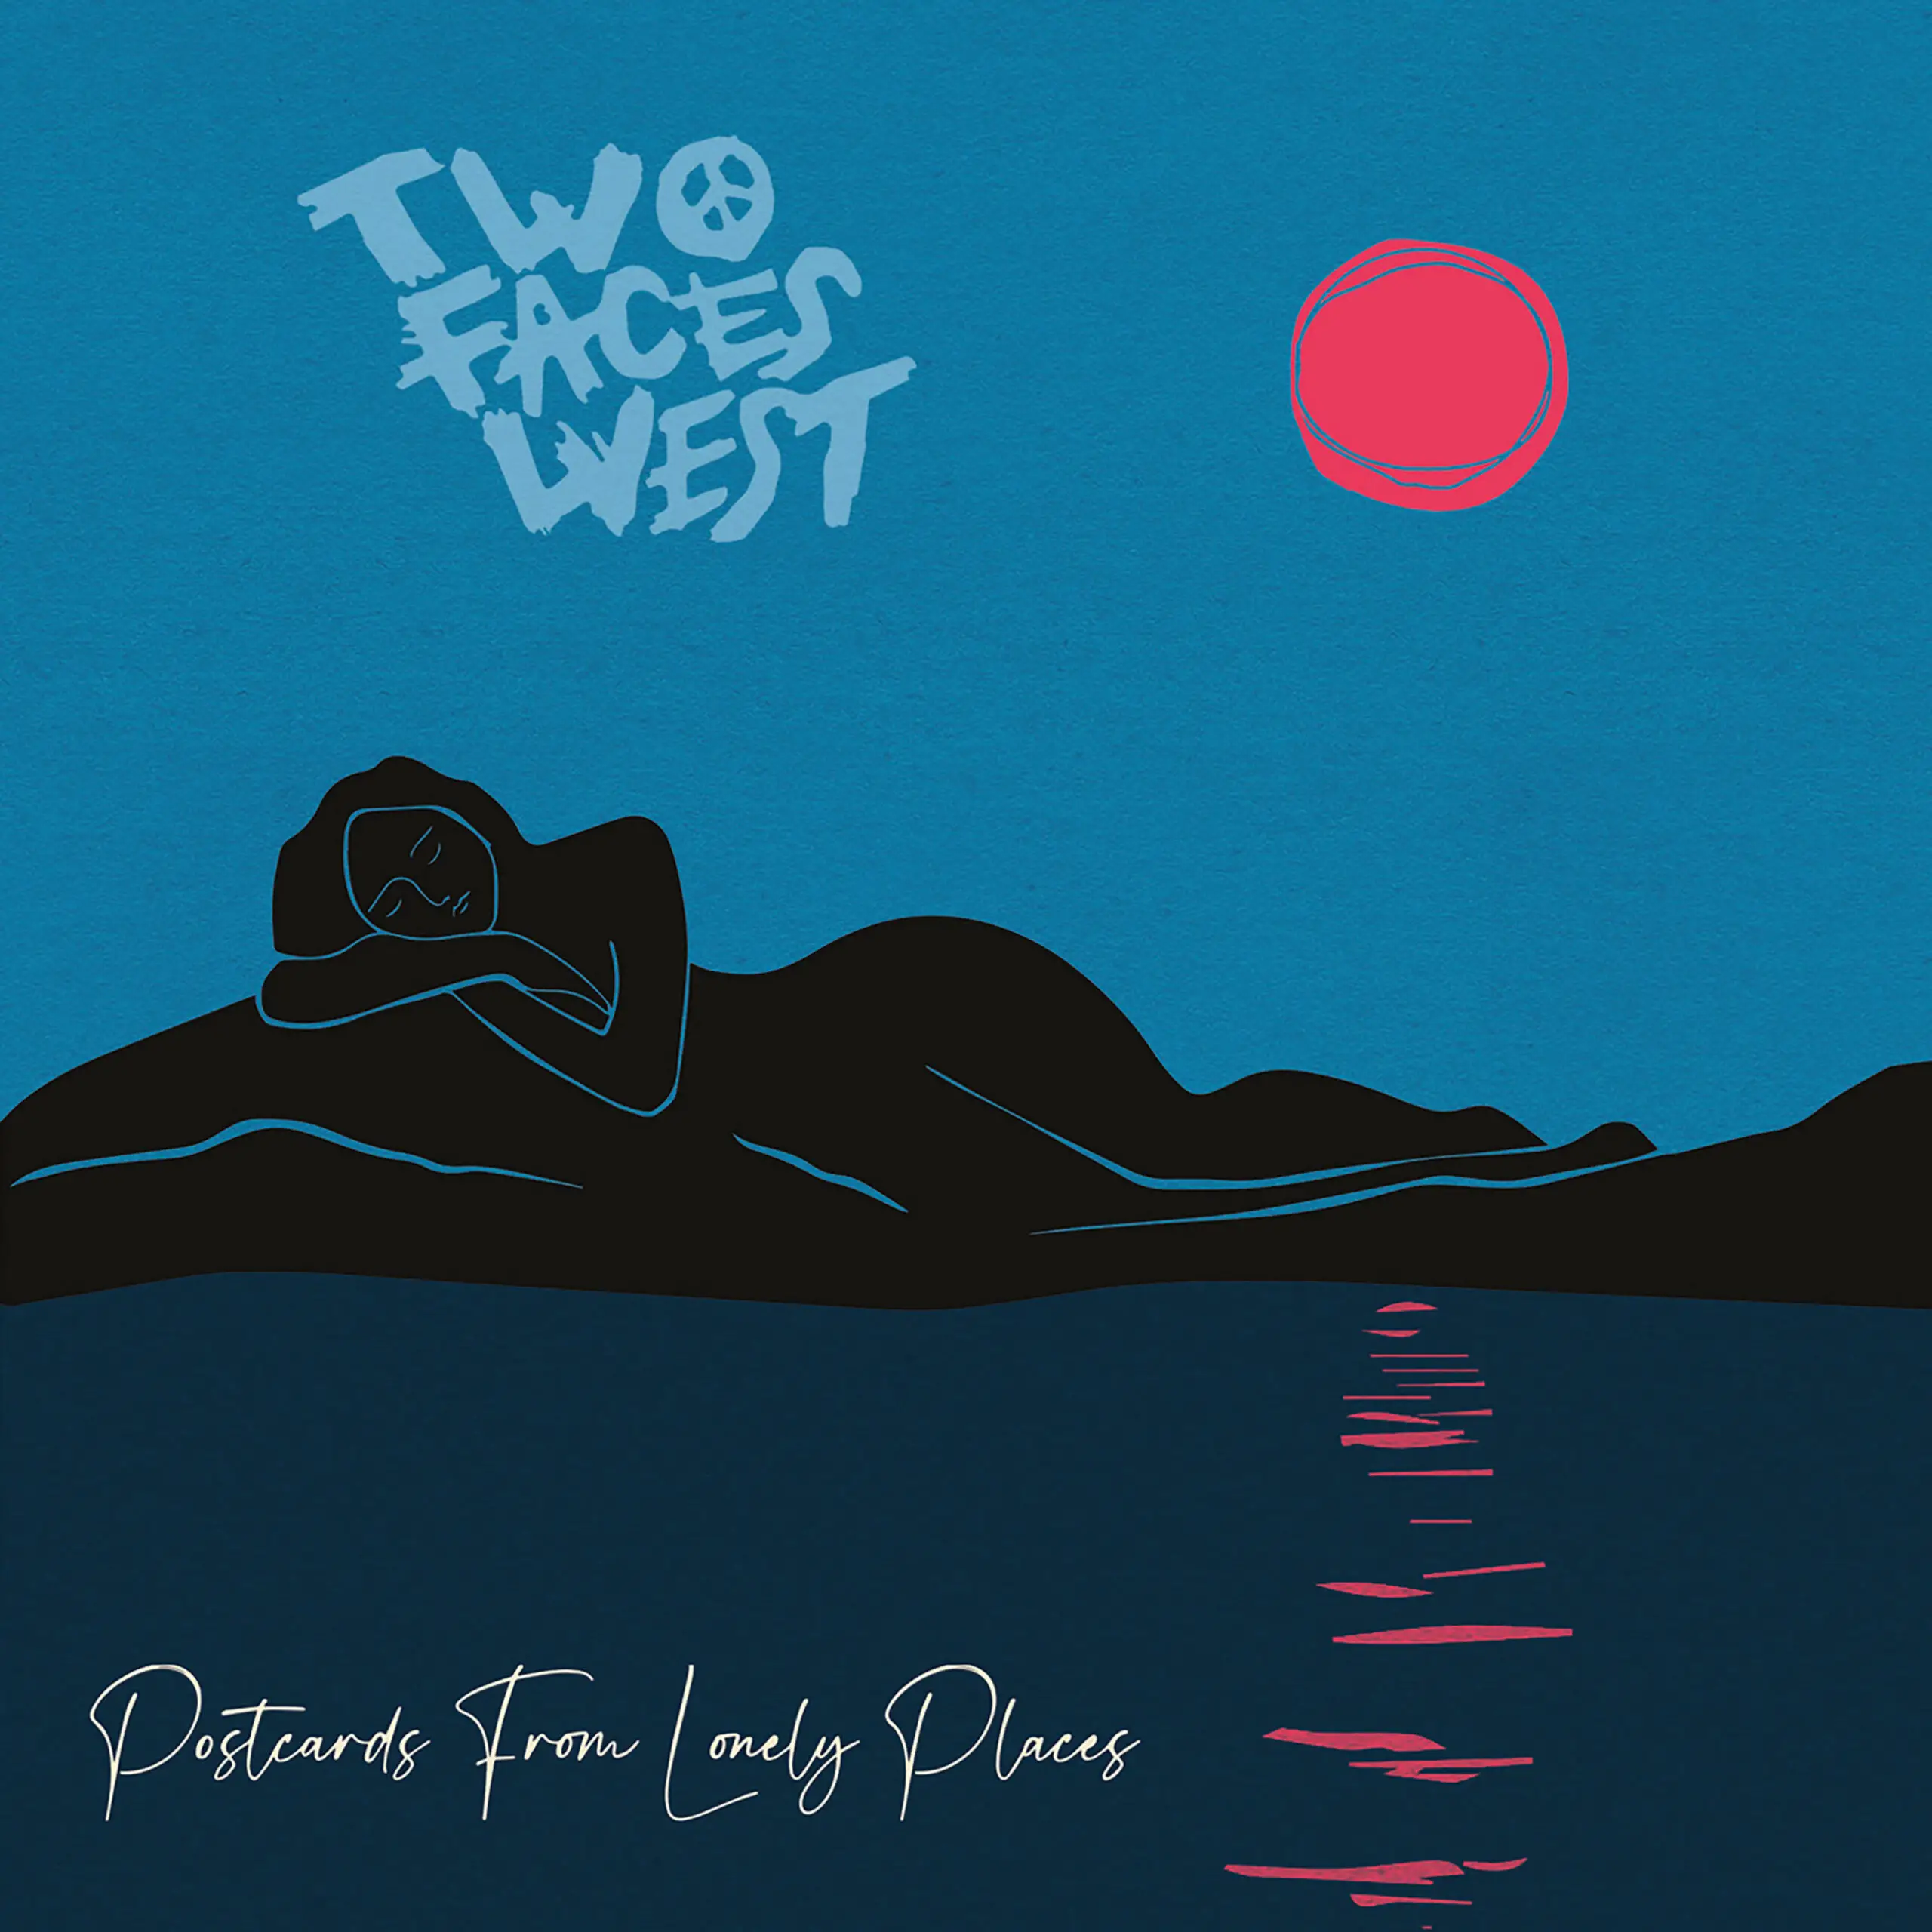 Two Faces West - 'Postcards From Lonely Places' Review | Opinions | LIVING LIFE FEARLESS